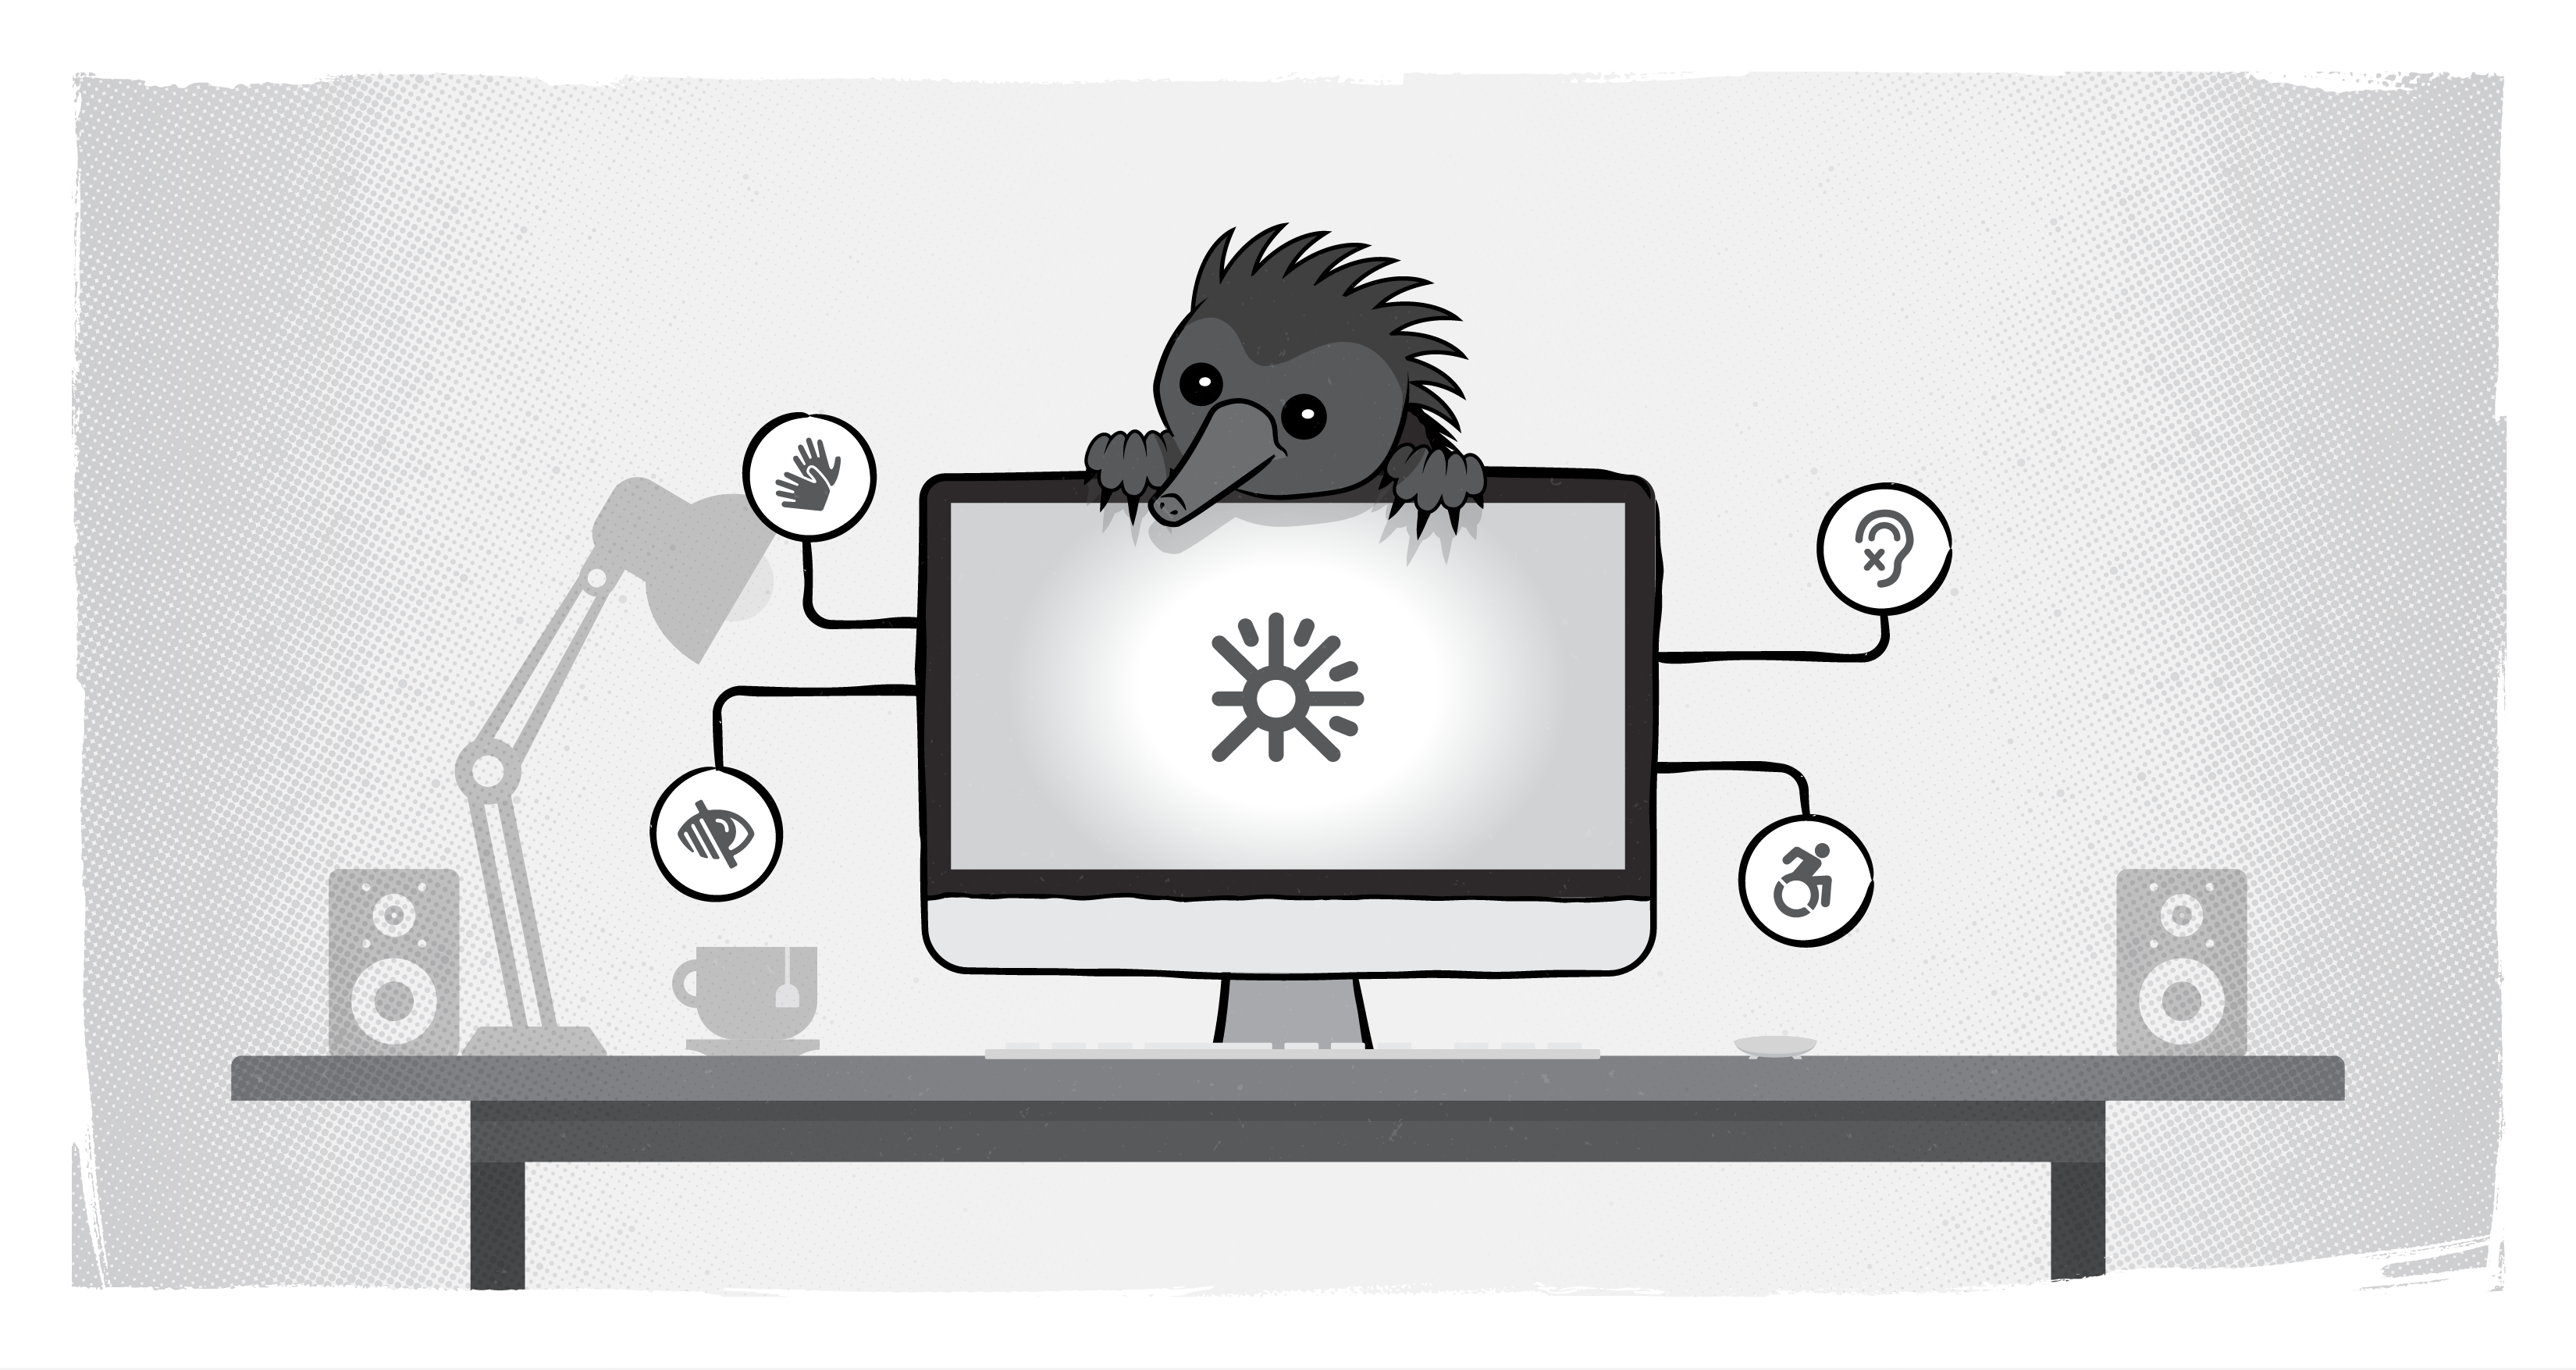 echidna perched over computer screen showing icons for deaf, low vision, etc.